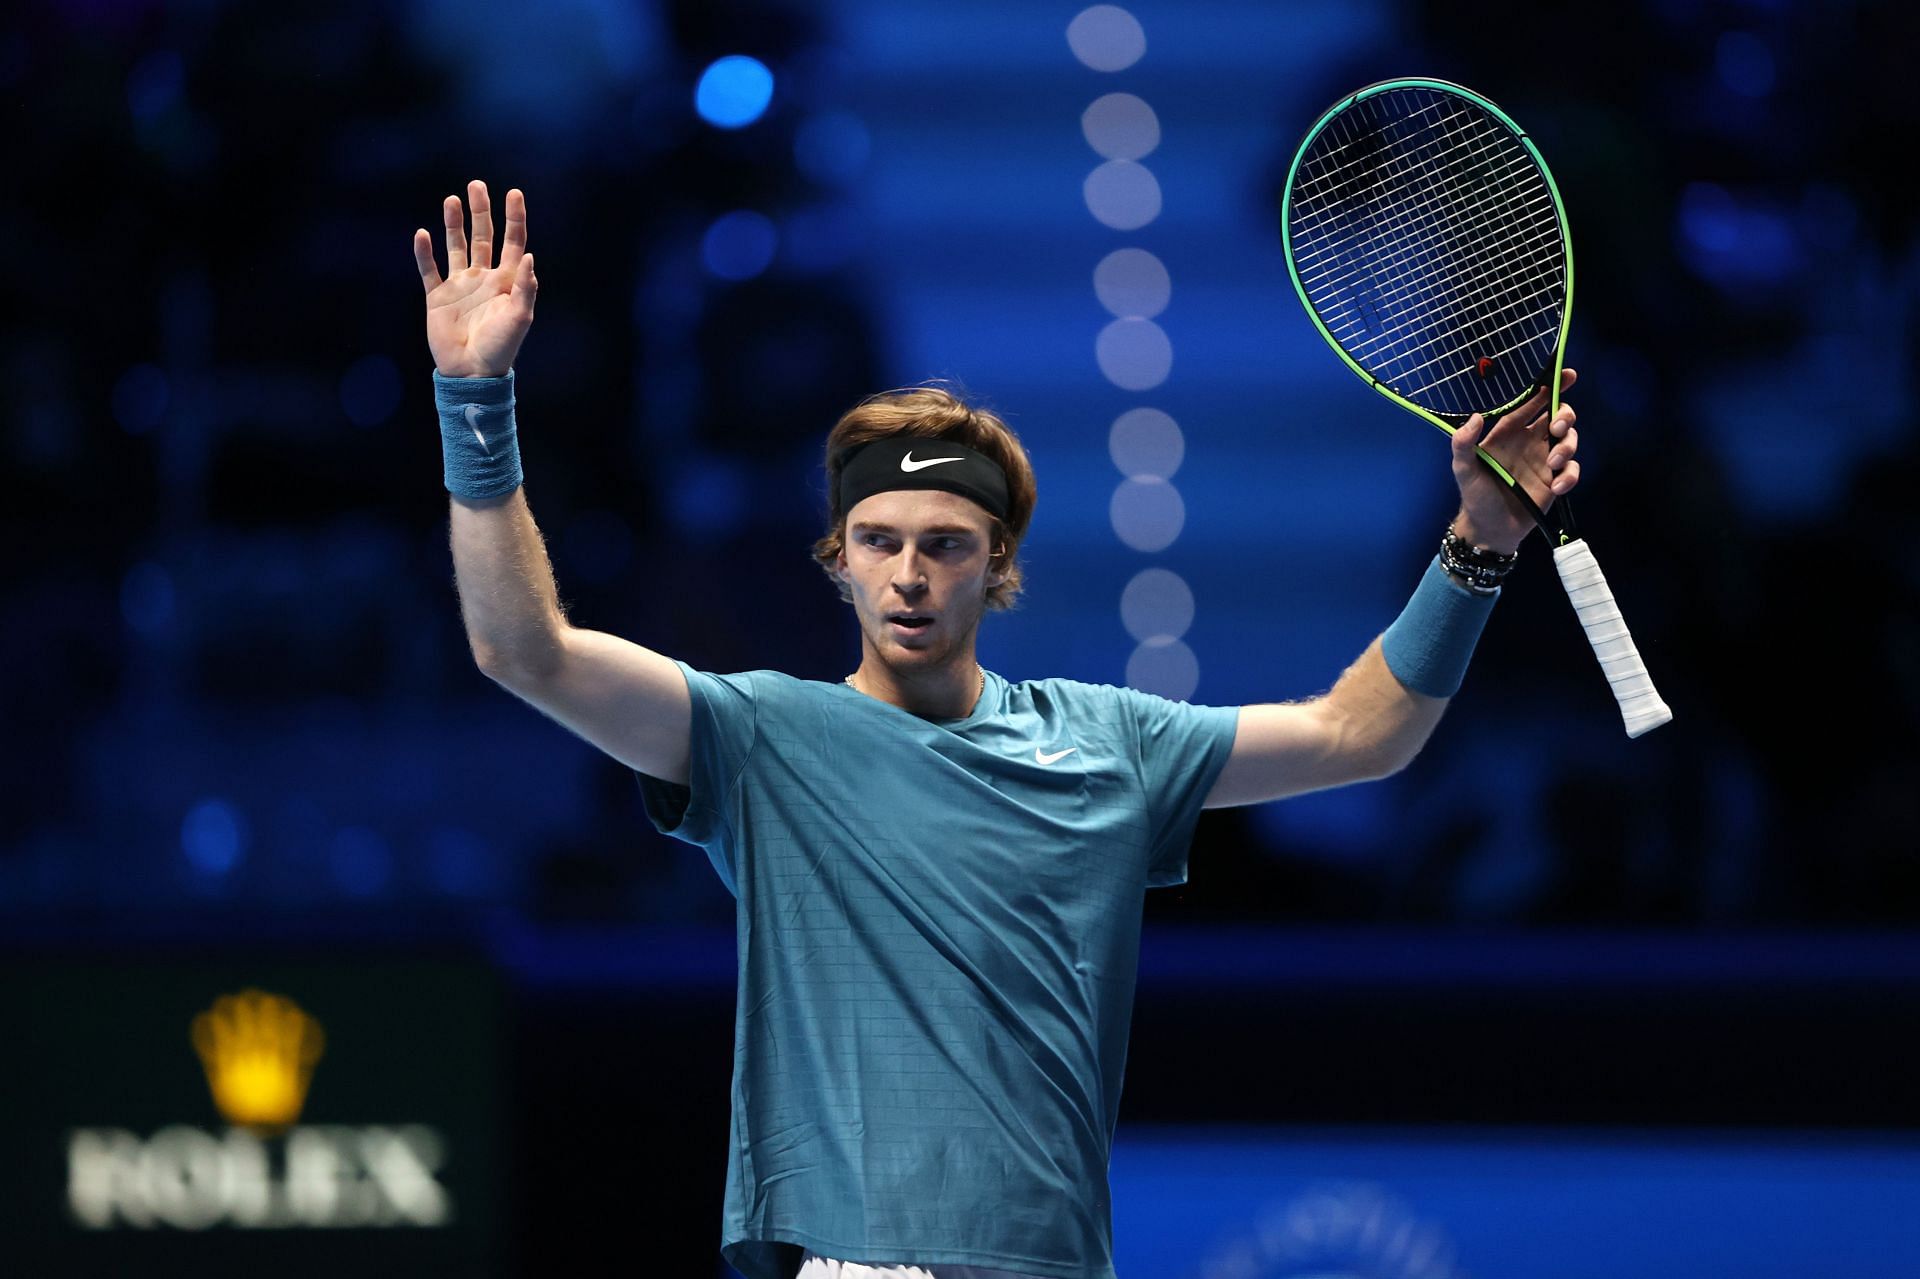 Rublev at the 2021 ATP Finals.